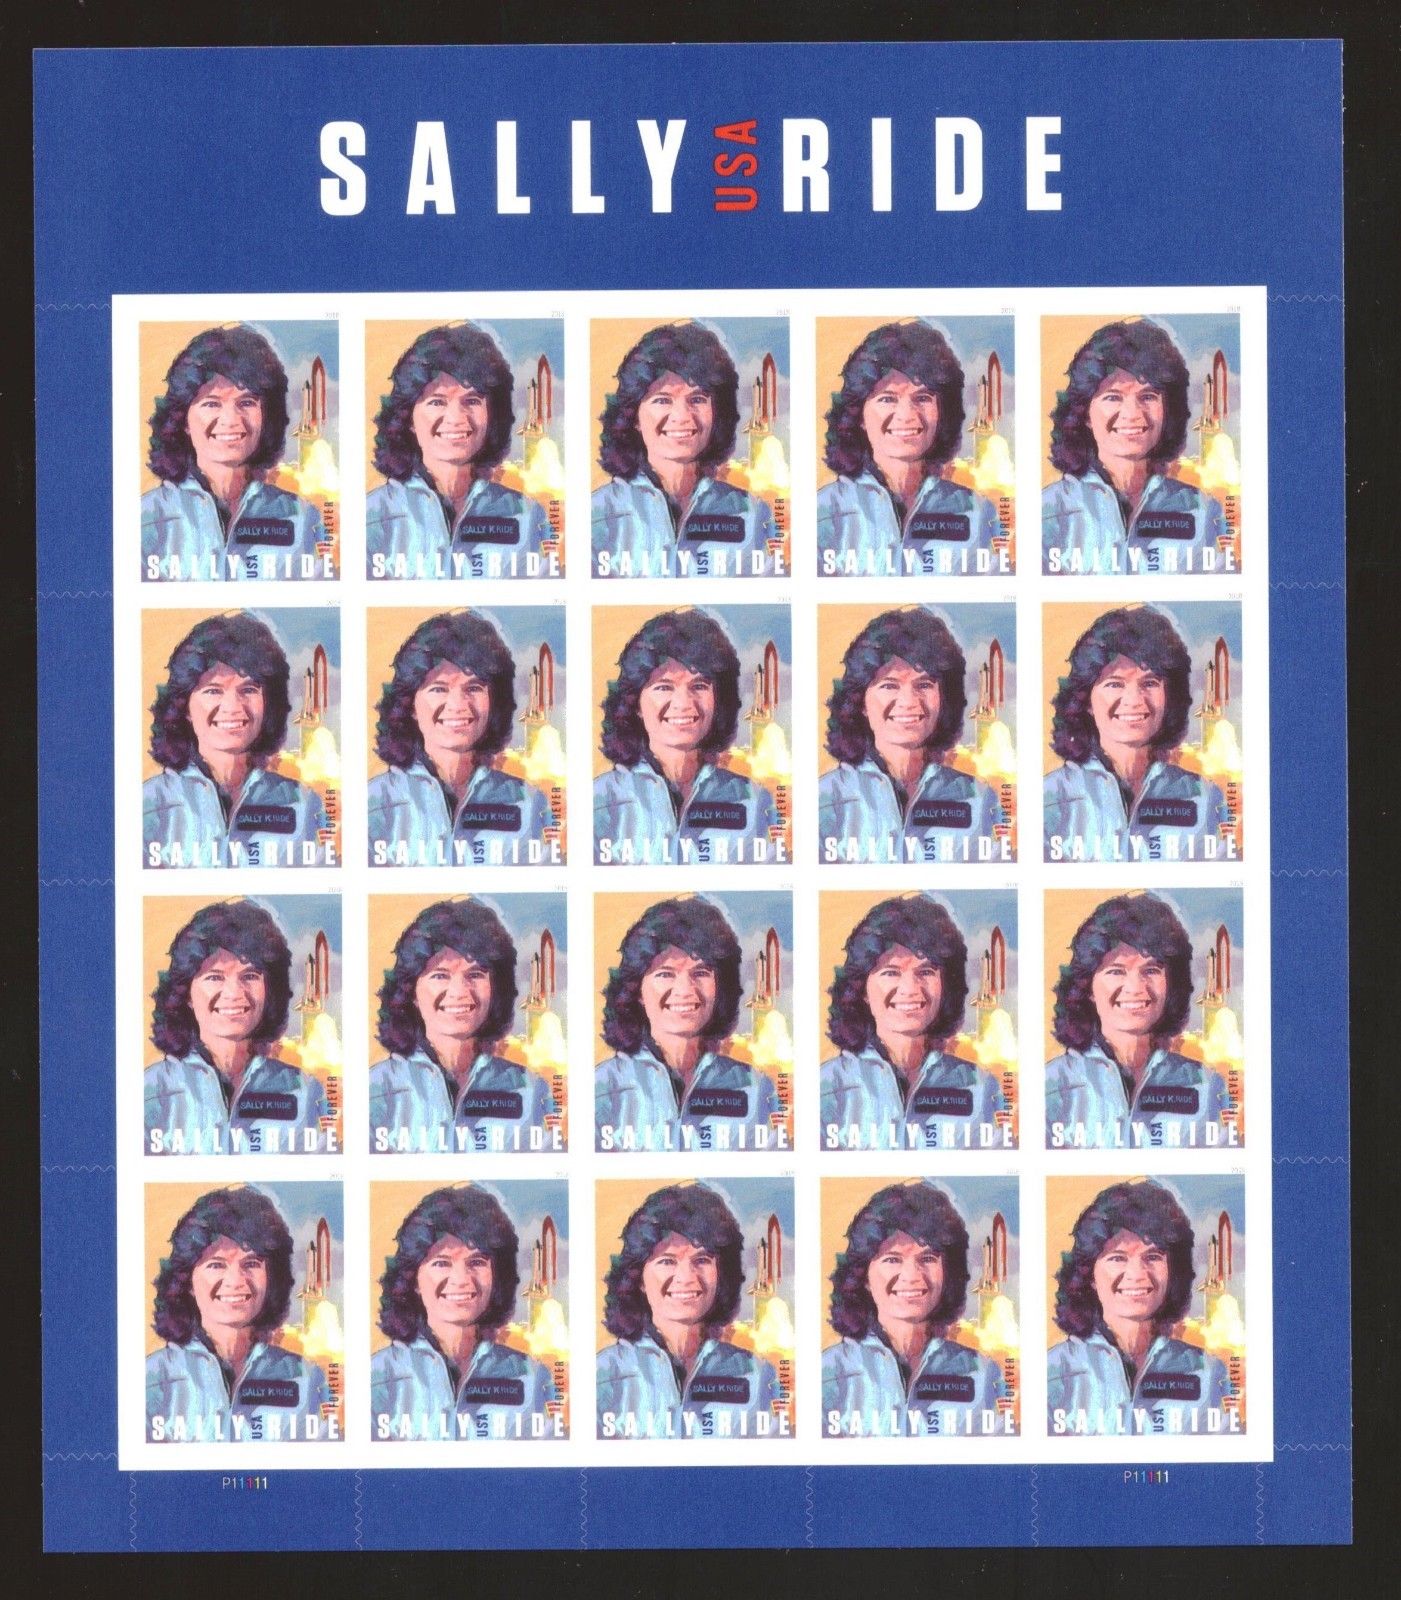 5283 Forever Sally Ride, Astronaut Mint Sheet of 20 #5283sh